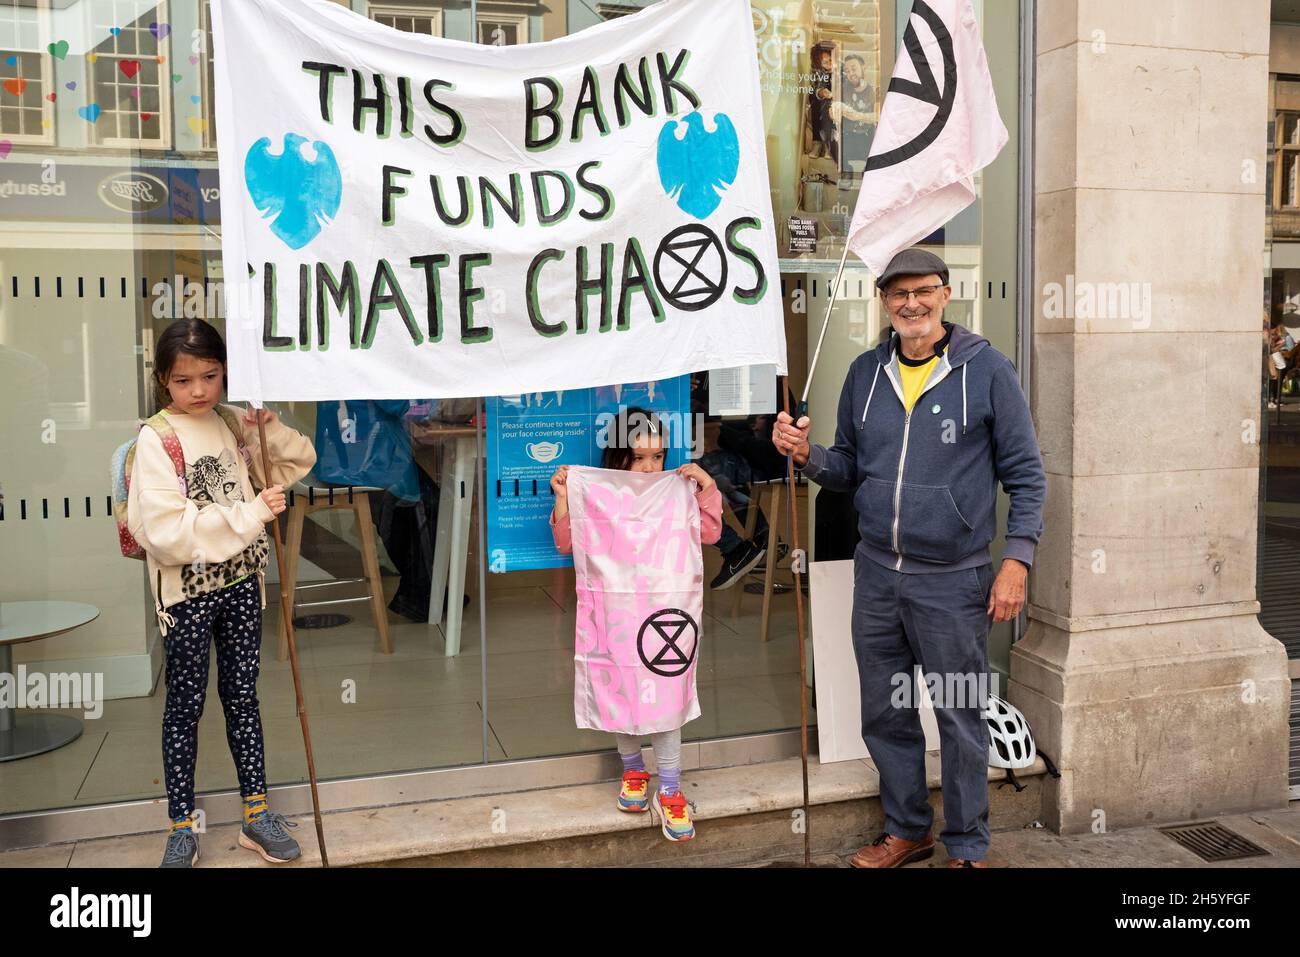 Oxford, UK. 21st October 2021. Extinction Rebellion protest outside City  Centre Barclays Bank. Extinction Rebellion claim Barclays fund climate chaos. Credit: Stephen Bell/Alamy Stock Photo